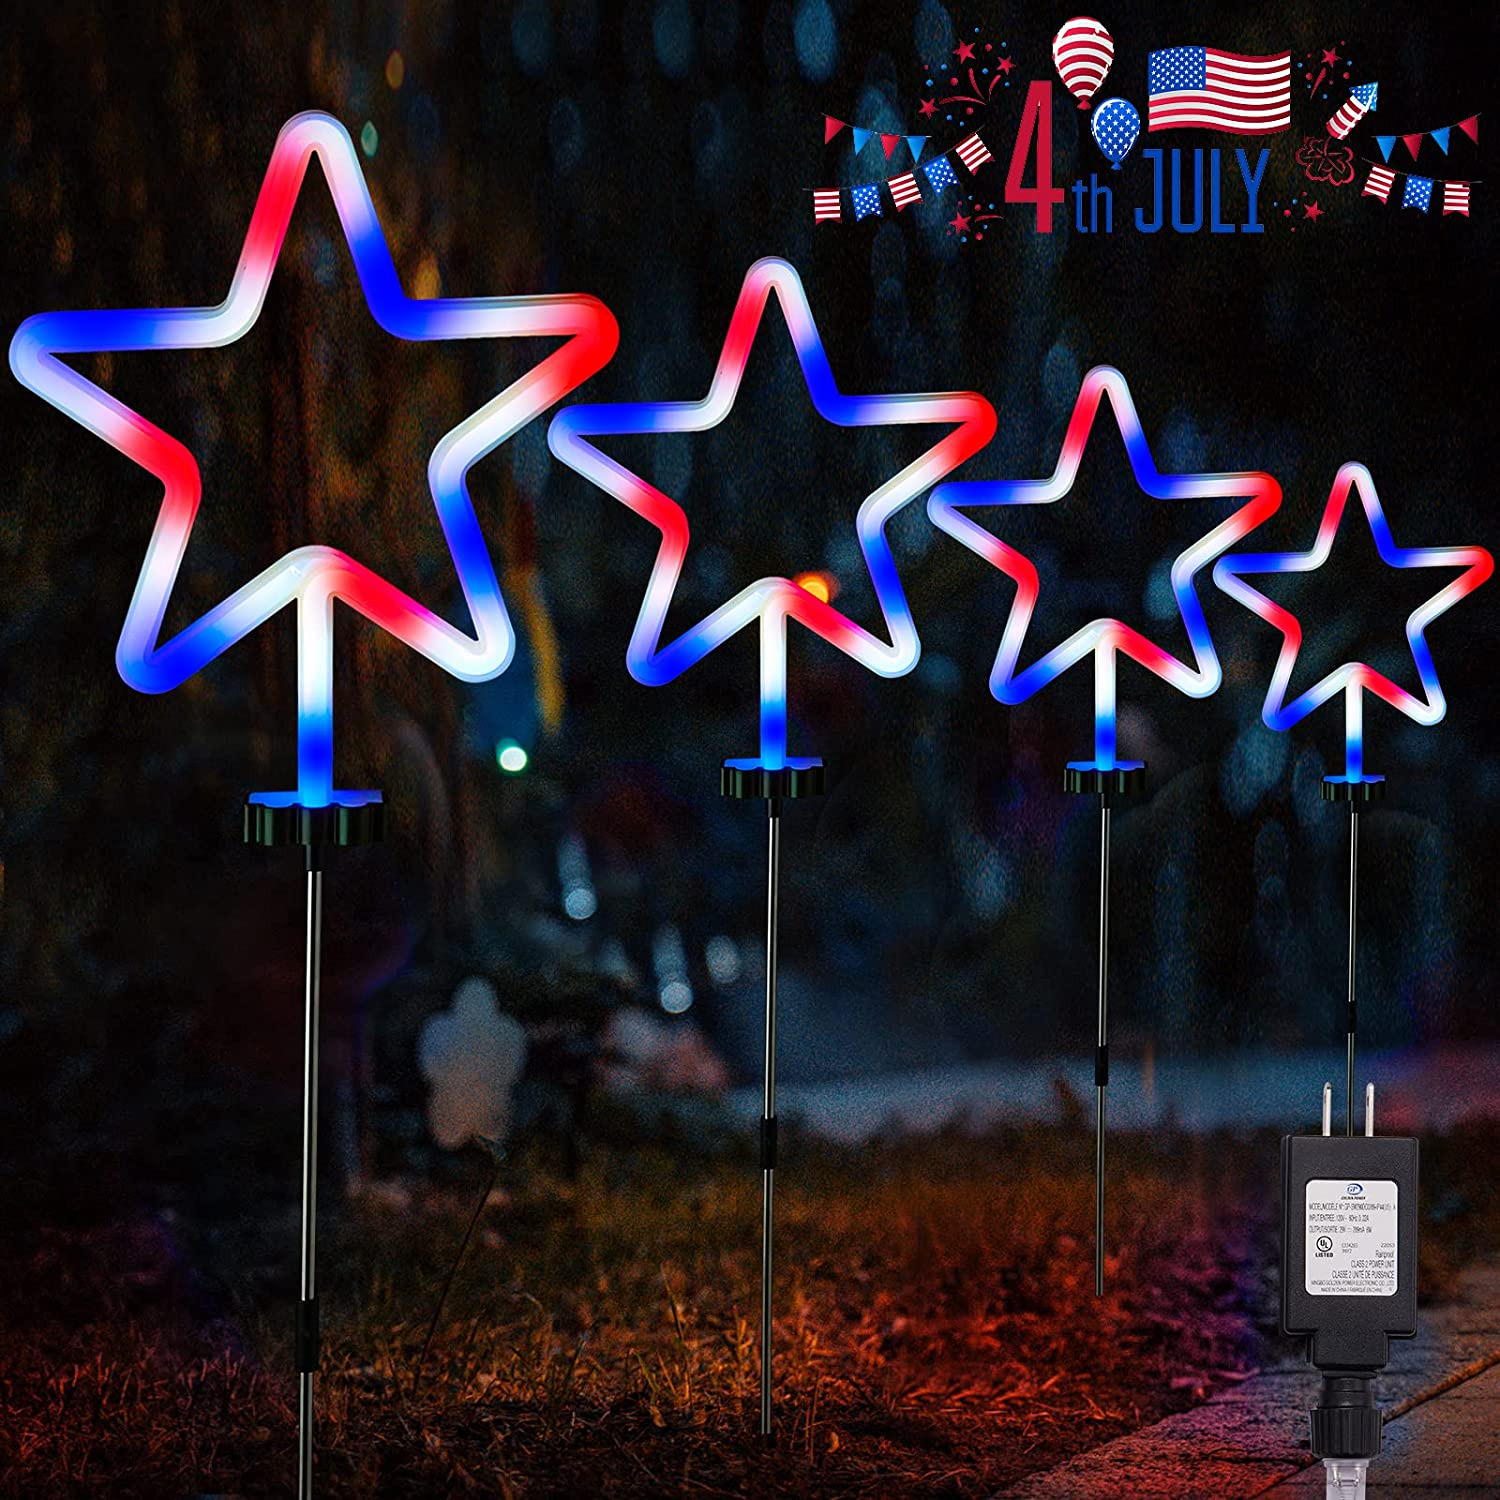 4Th of July Decorations, 4PCS Red White and Blue Lights with Stainless Steel Sta